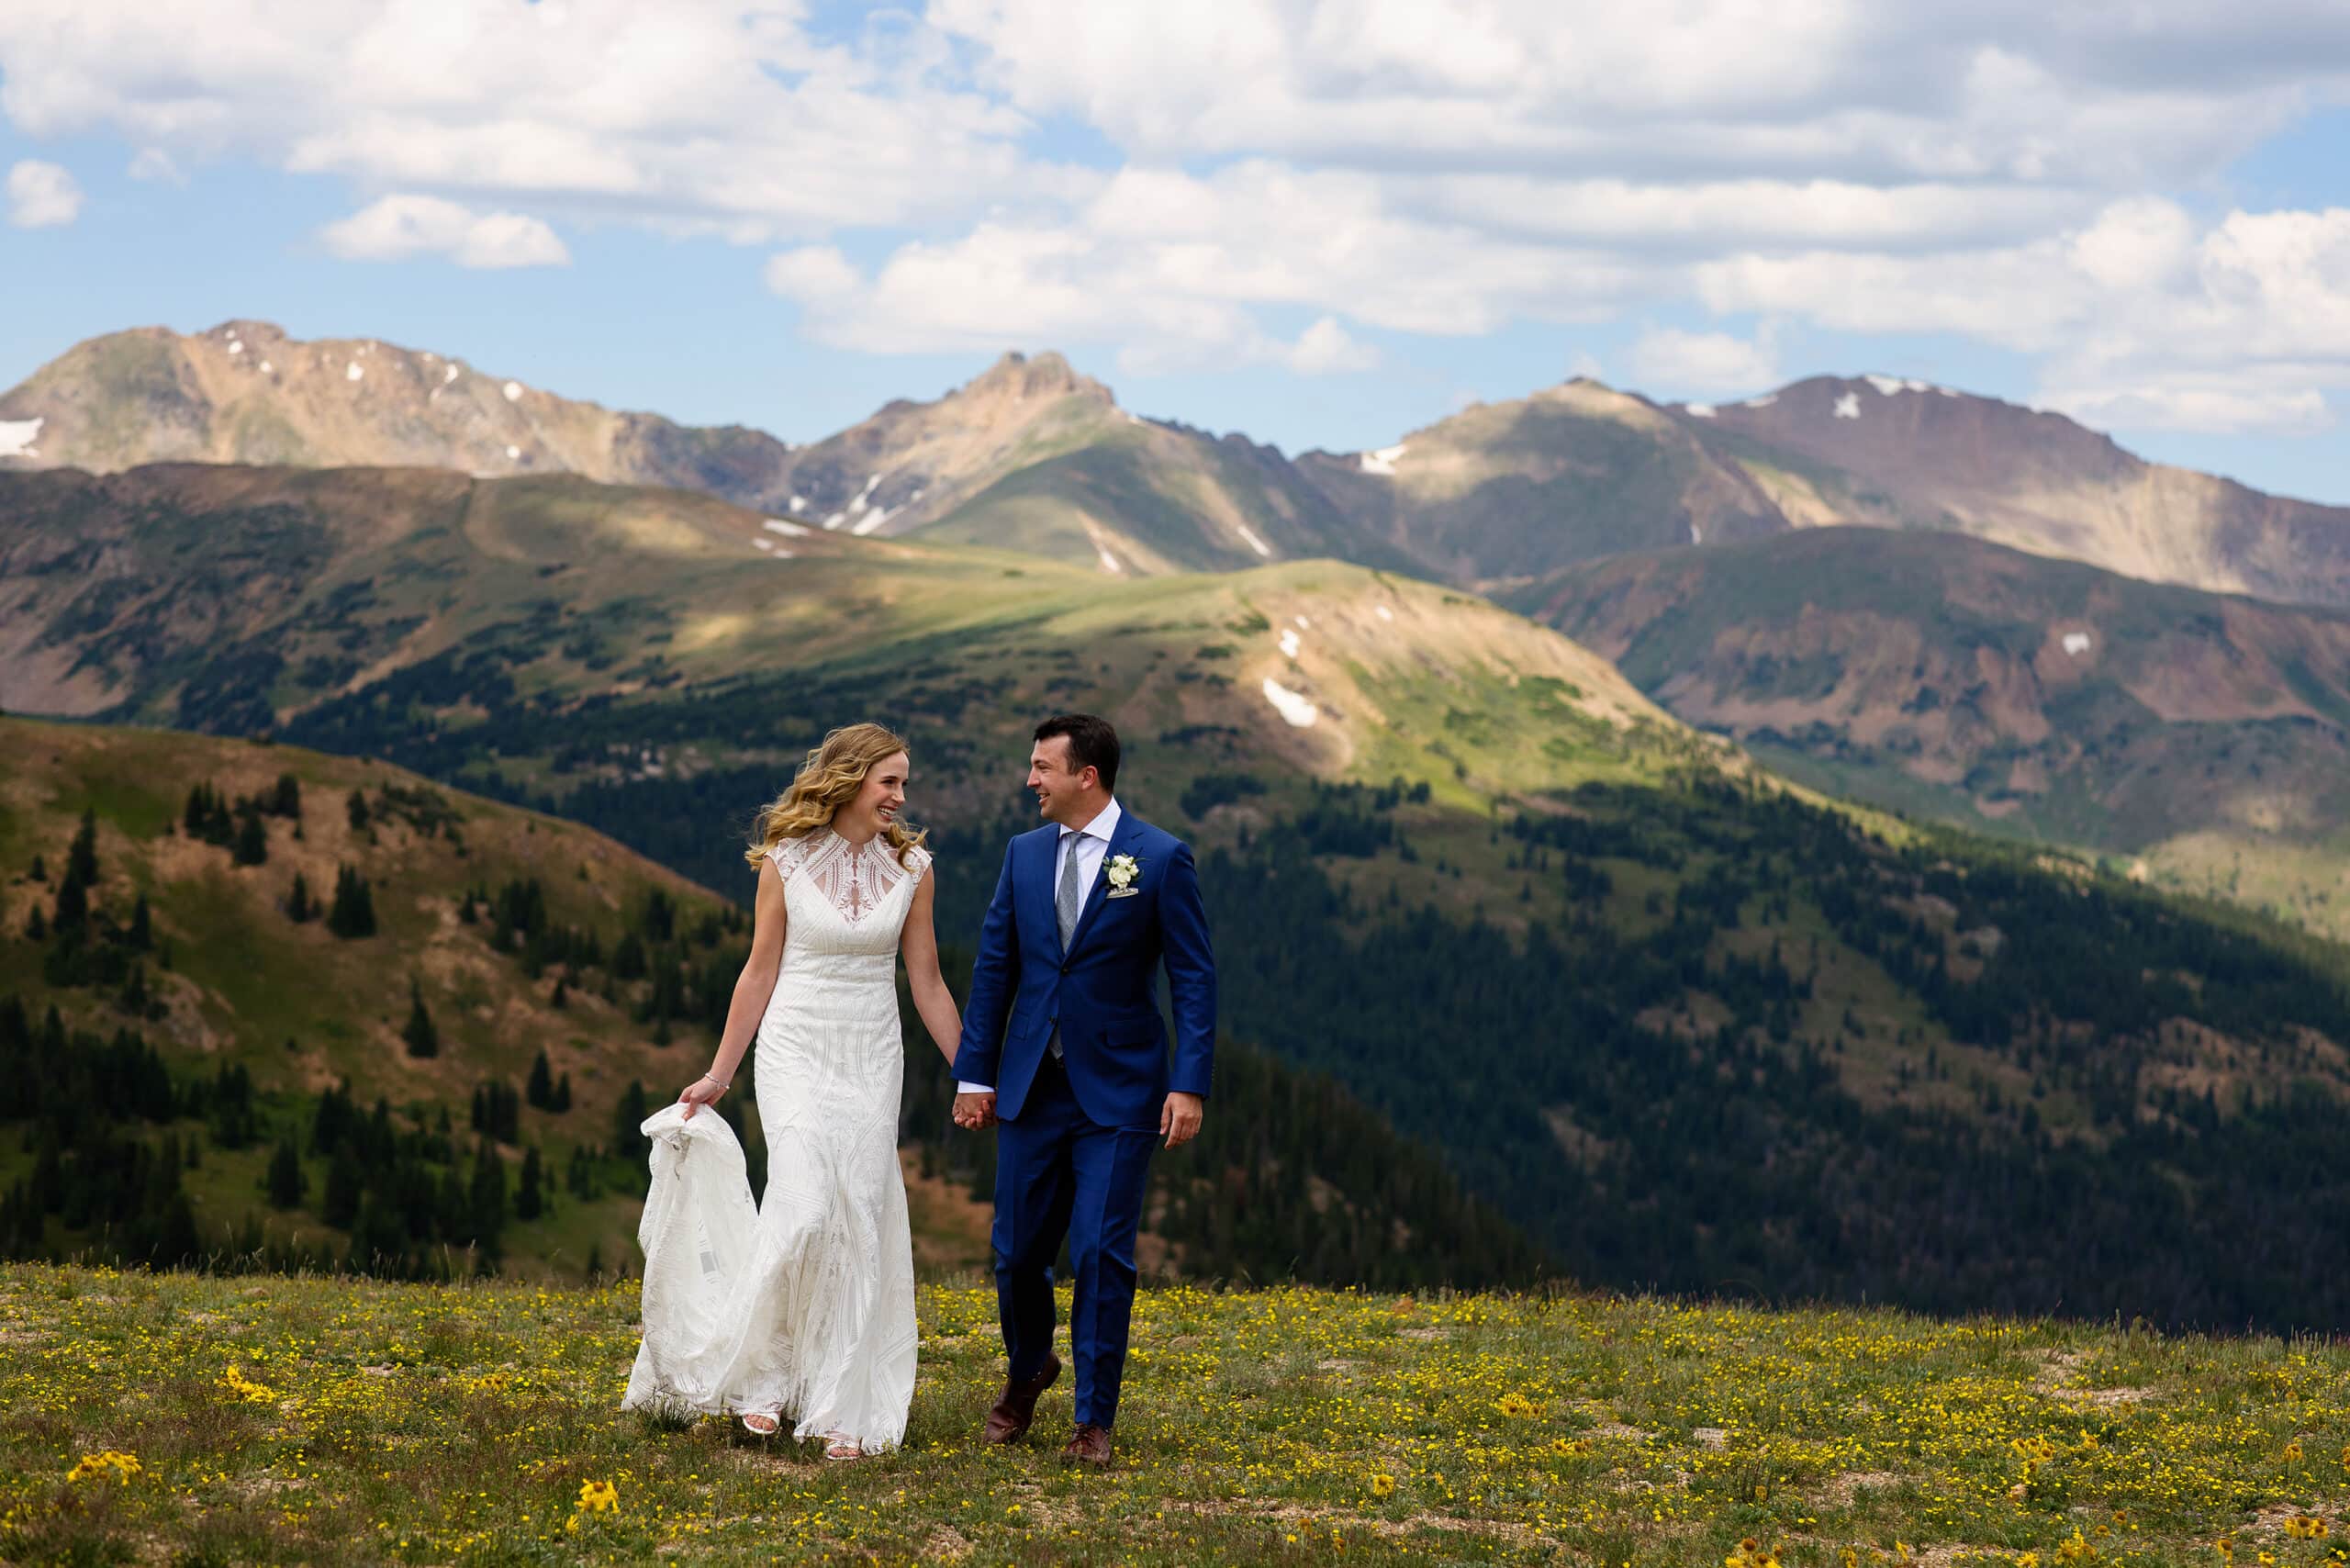 The bride and groom walk together on Loveland Pass